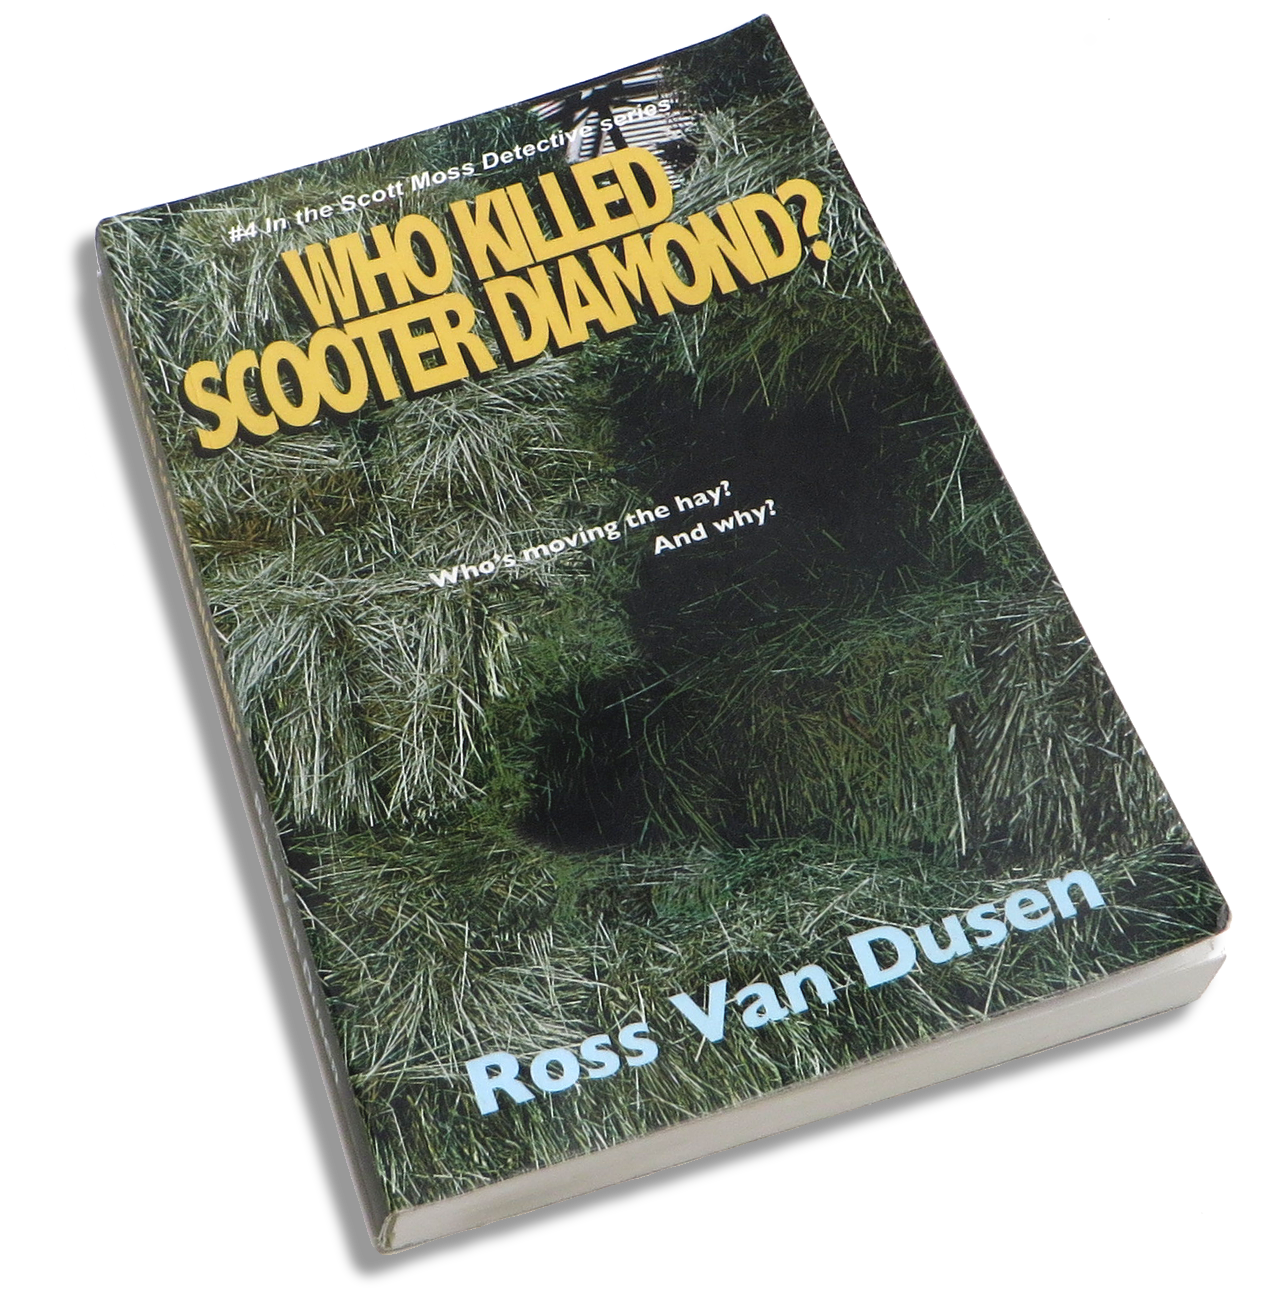 Who Killed Scooter Diamond? book